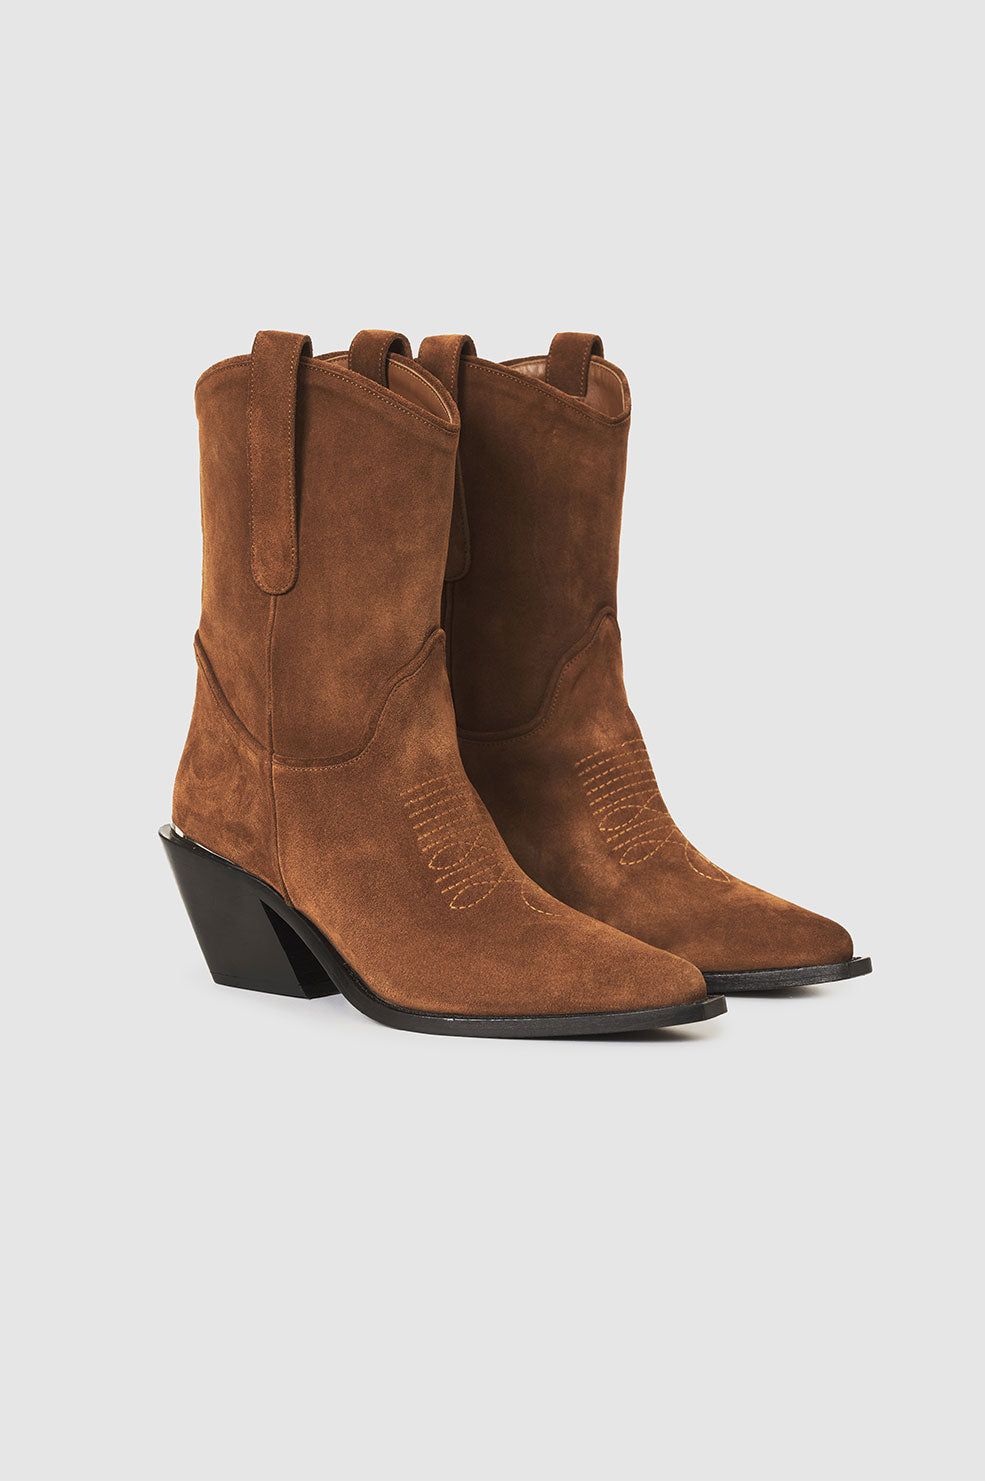 ANINE BING Mid Tania Boots - Toffee Suede - Side Pair View